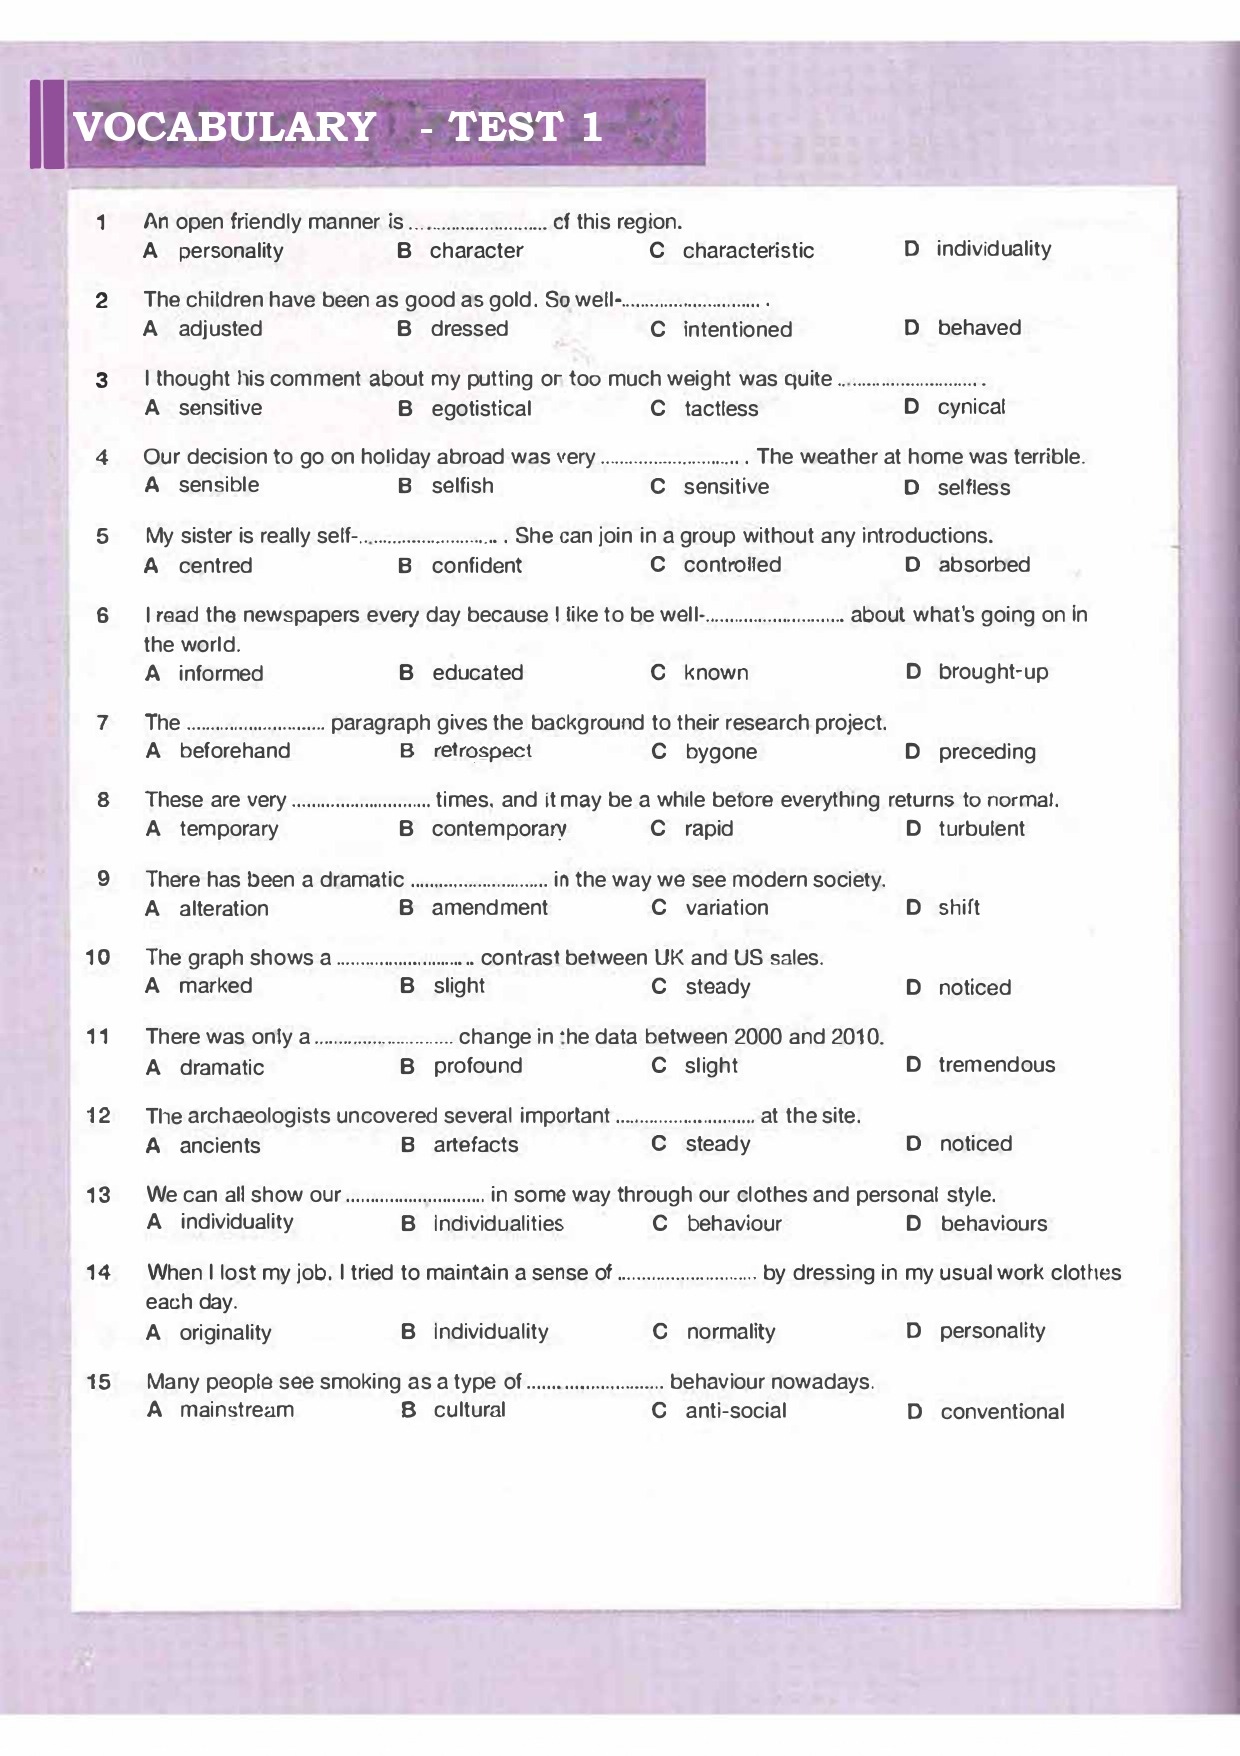 [tailieudieuky.com] Vocabulary tests for gifted students with key (13 pages)_page-0001